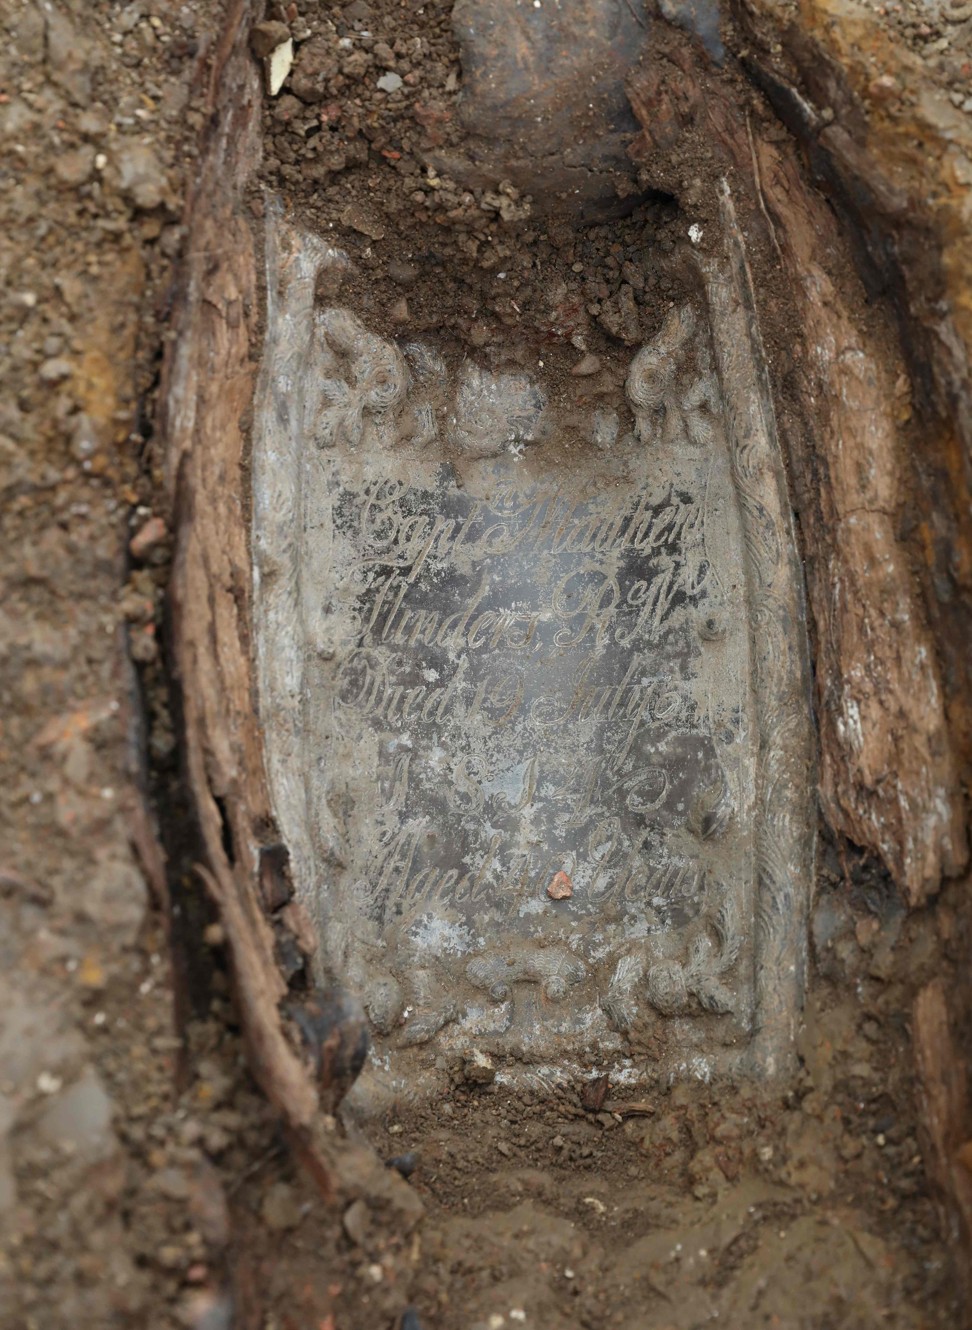 The coffin plate of Royal Navy captain Matthew Flinders, unearthed during the archaeological excavation and research works at St James's Gardens near Euston train station in London. Photo: AFP